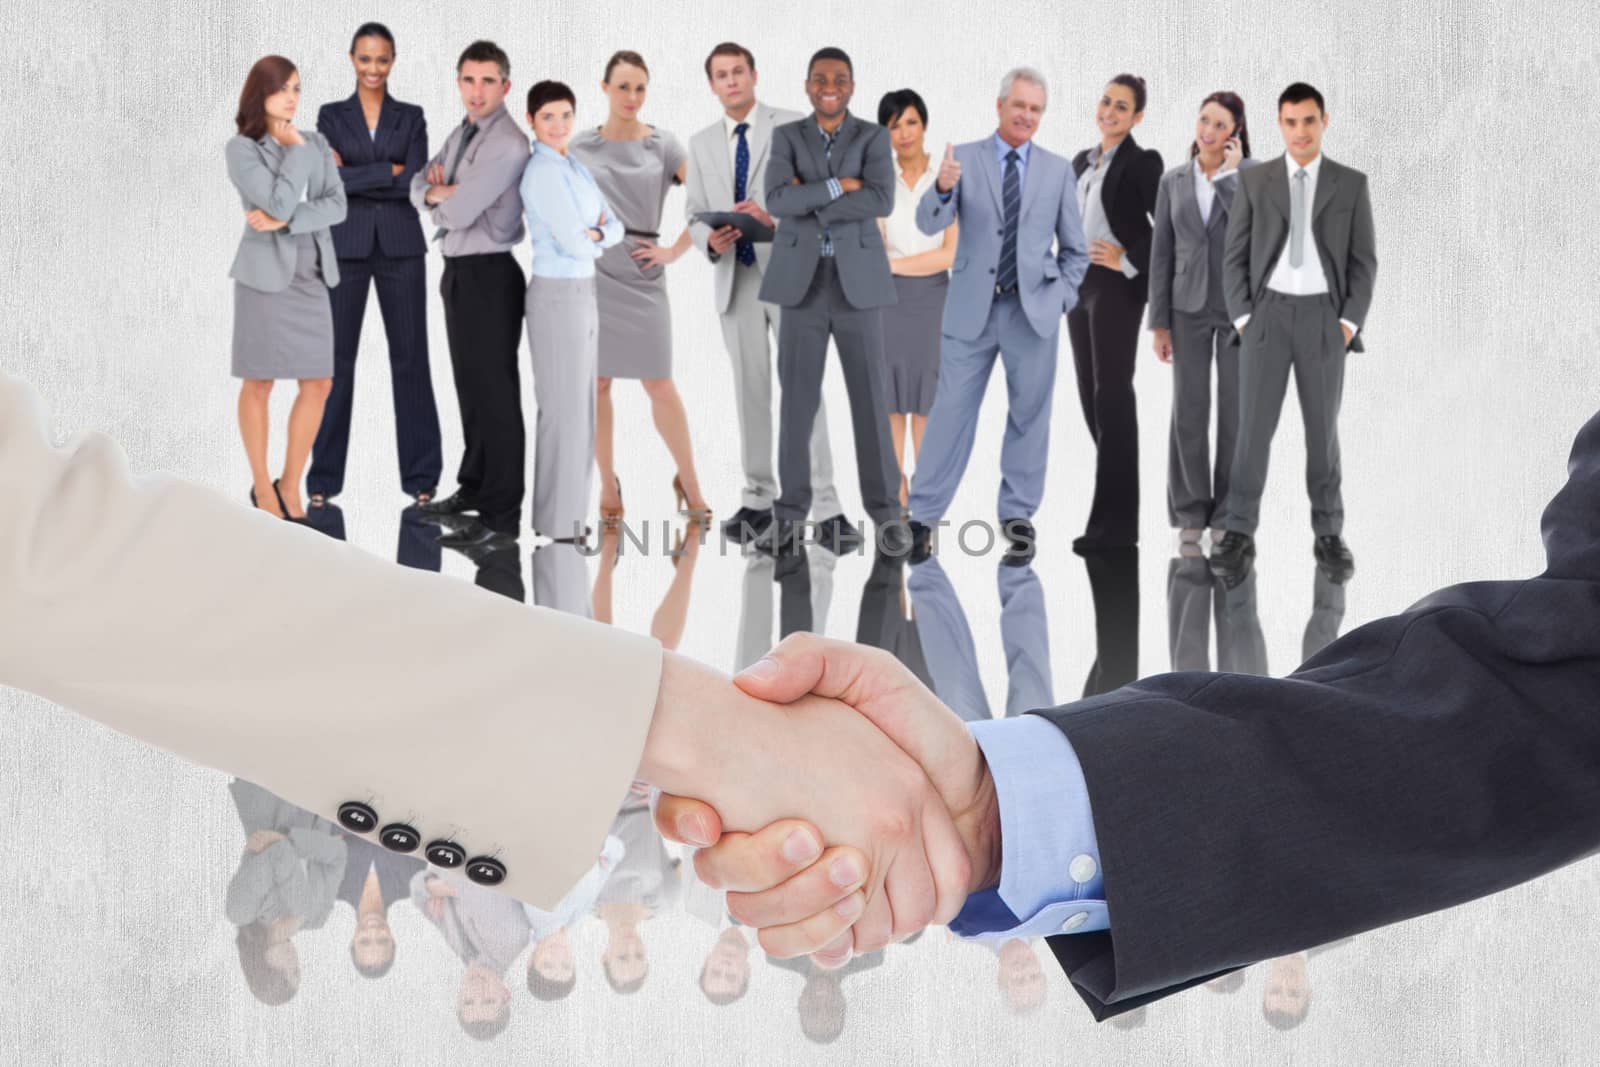 Smiling business people shaking hands while looking at the camera against white background